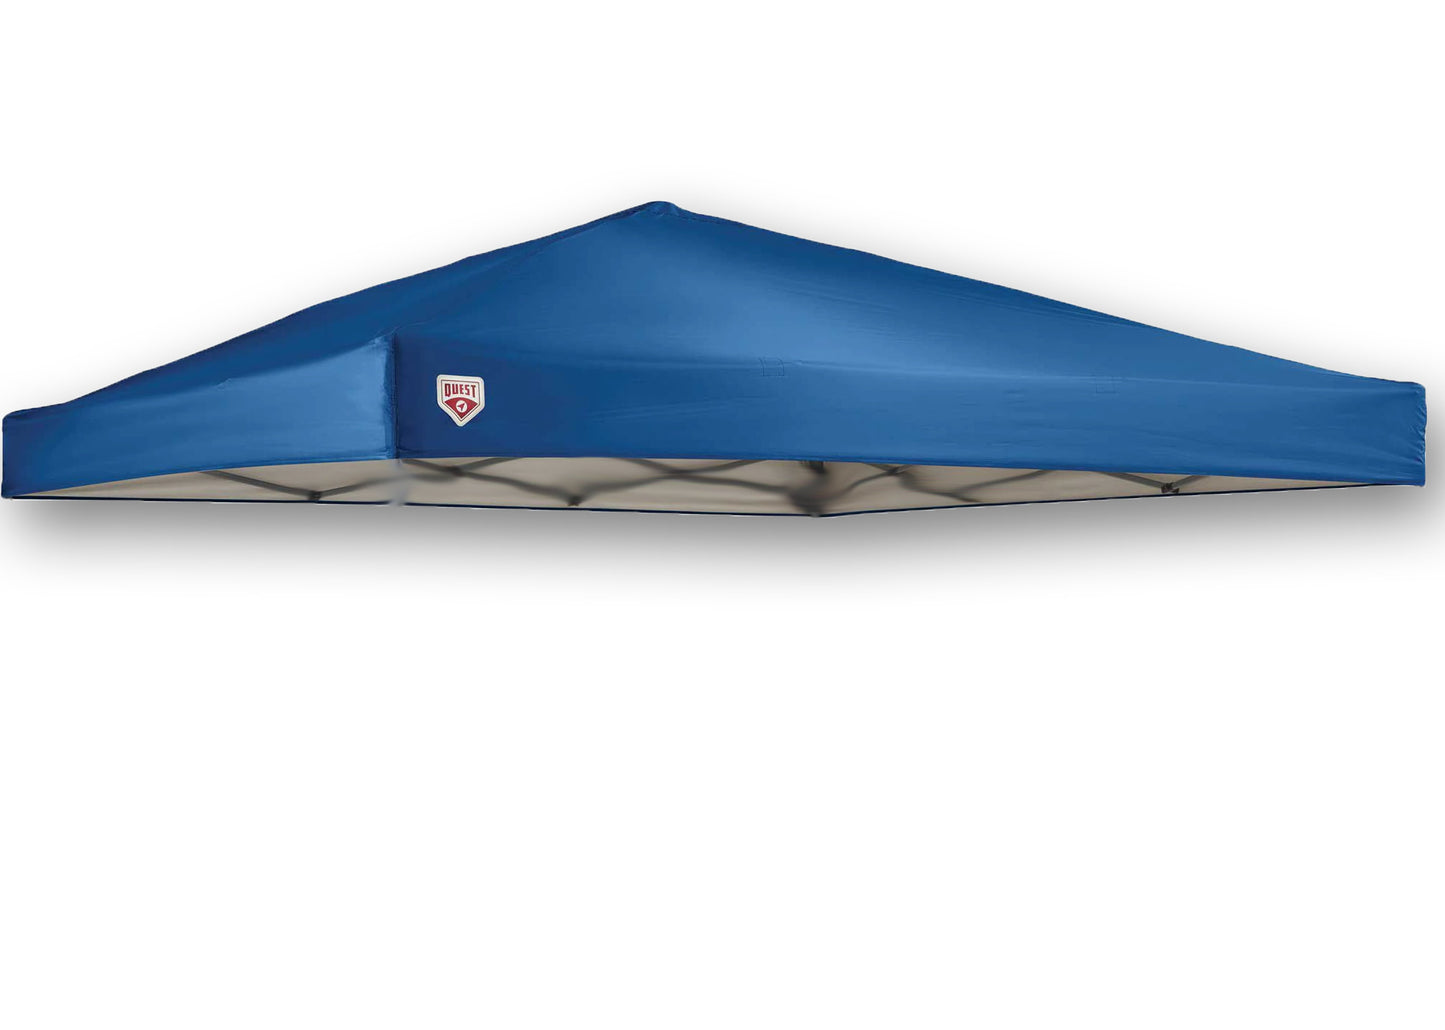 The image shows a replacement canopy top for a tent or a portable gazebo. It's a plain blue fabric stretched over the canopy frame, with a trapezoidal shape